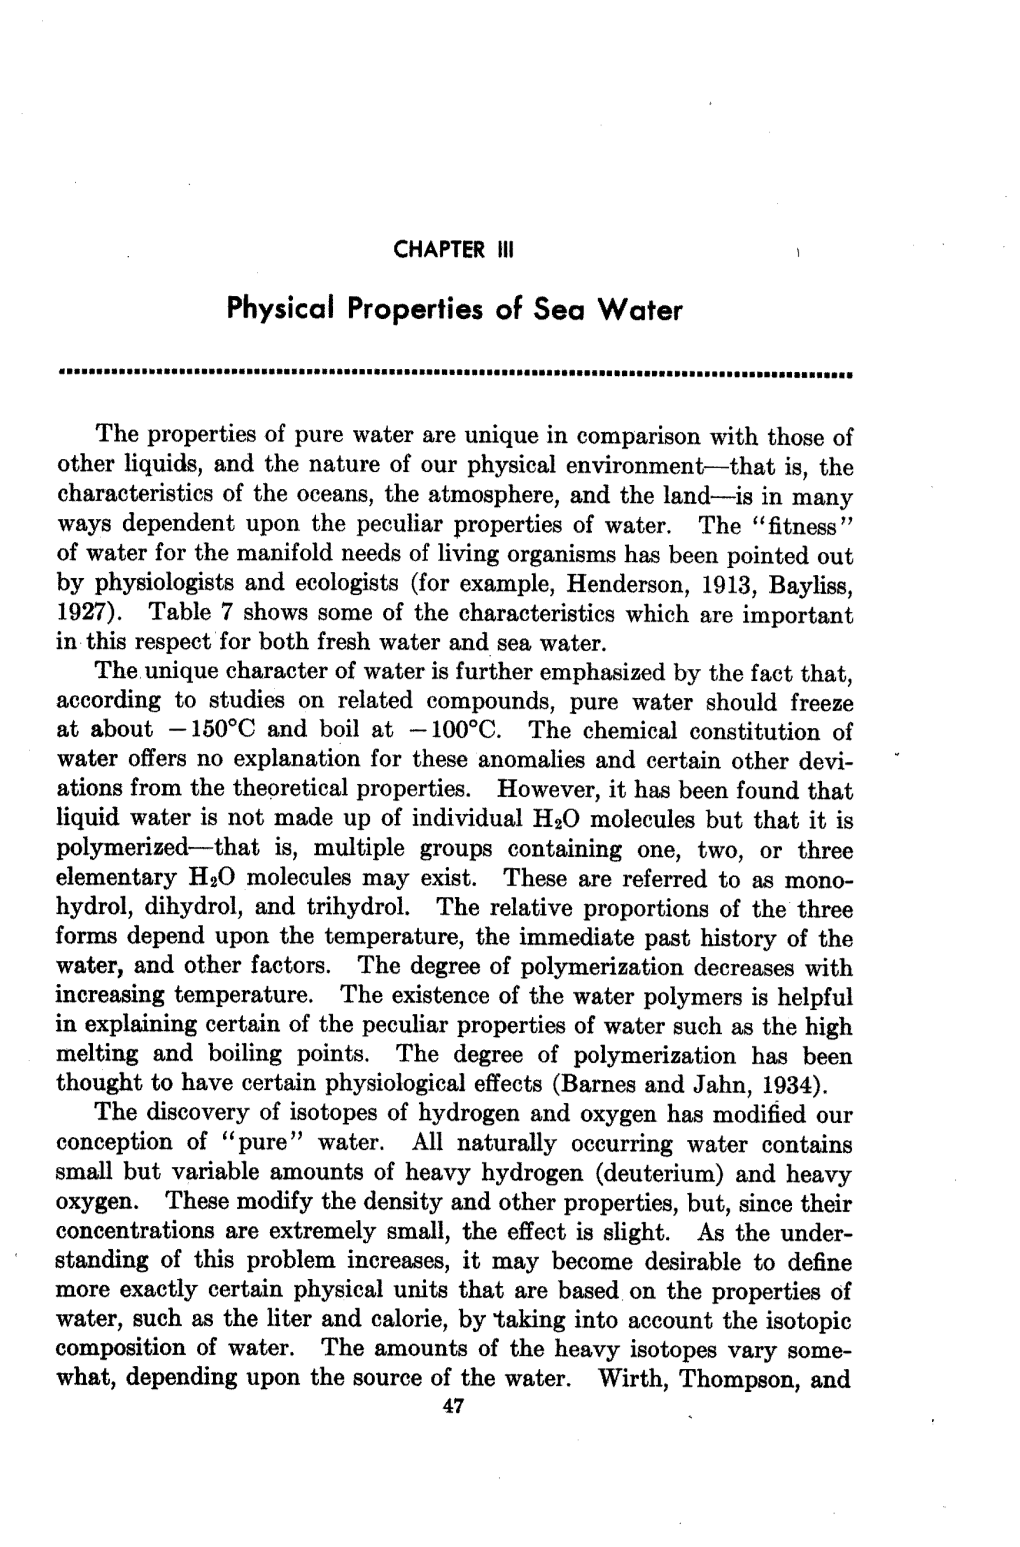 Physical Properties of Sea Water